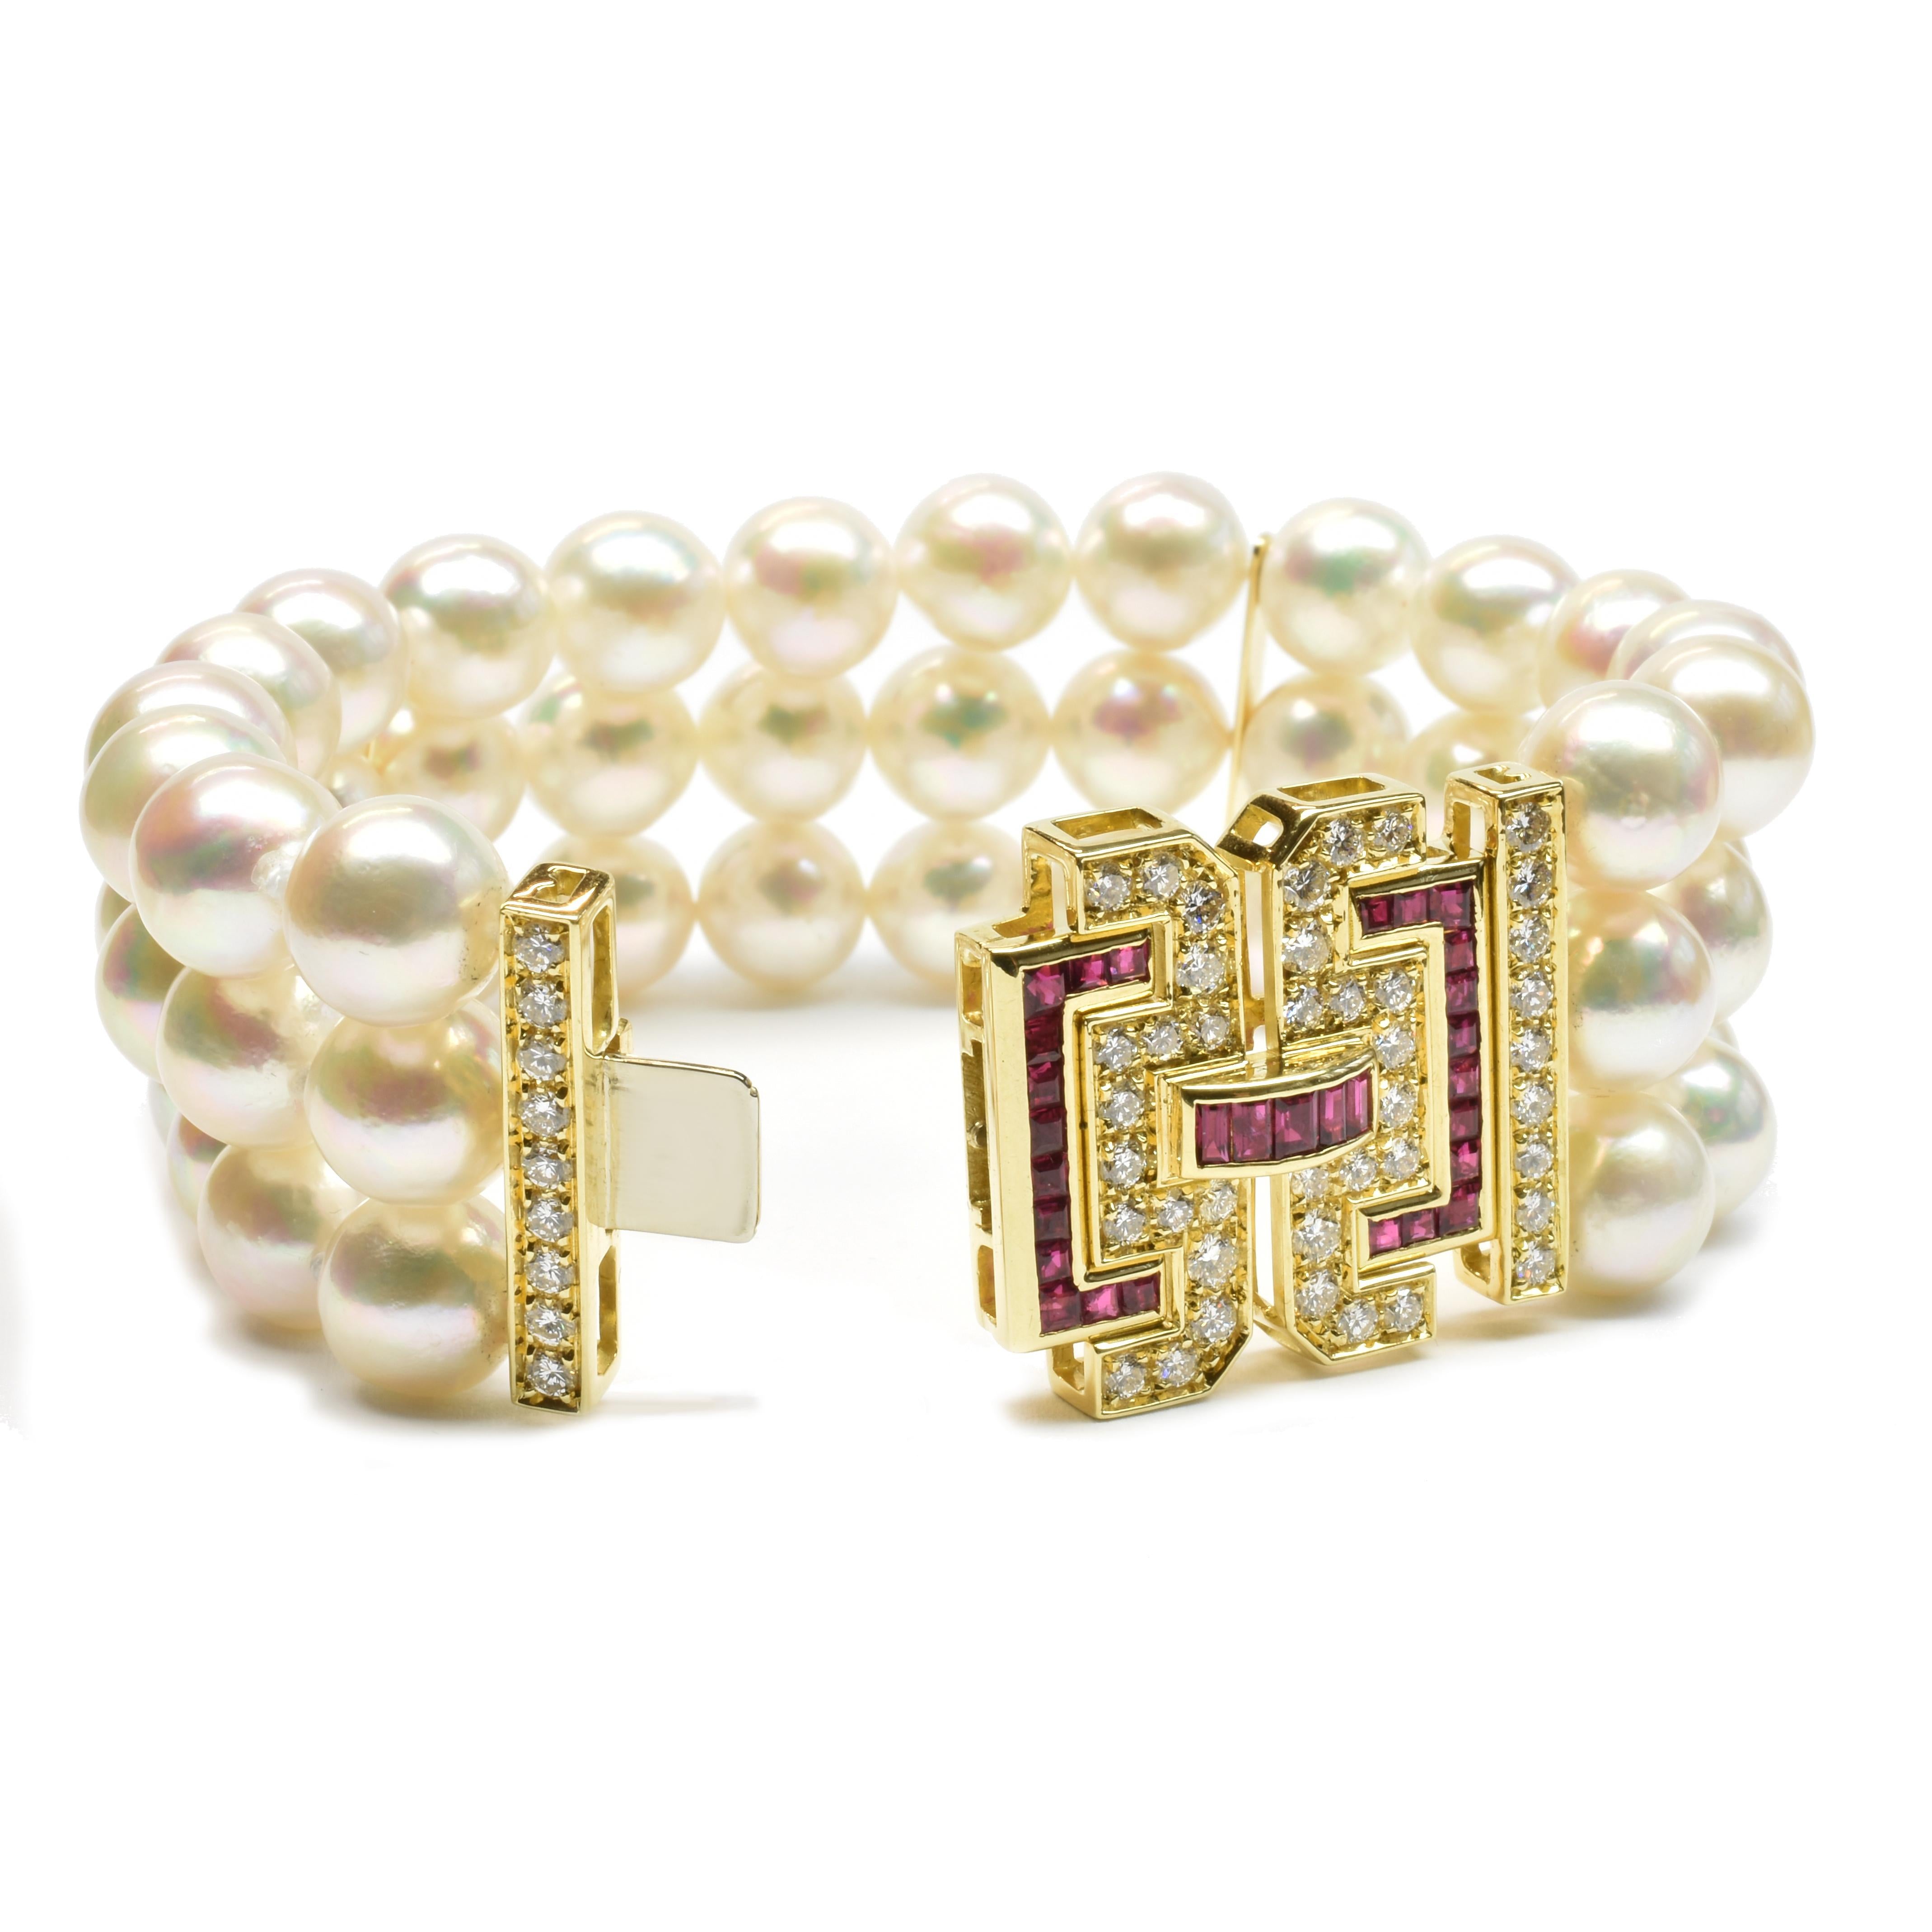 18Kt Yellow Gold Bracelet with a triple row of 9.50 mm Japanese Cultured Natural Pearls Akoya. 
Top Quality Pearls with a high grade of roundness and color.
Unique Art Deco Style Clasp with Carrè Cut Natural Rubies and Round Cut Diamonds.
One of a